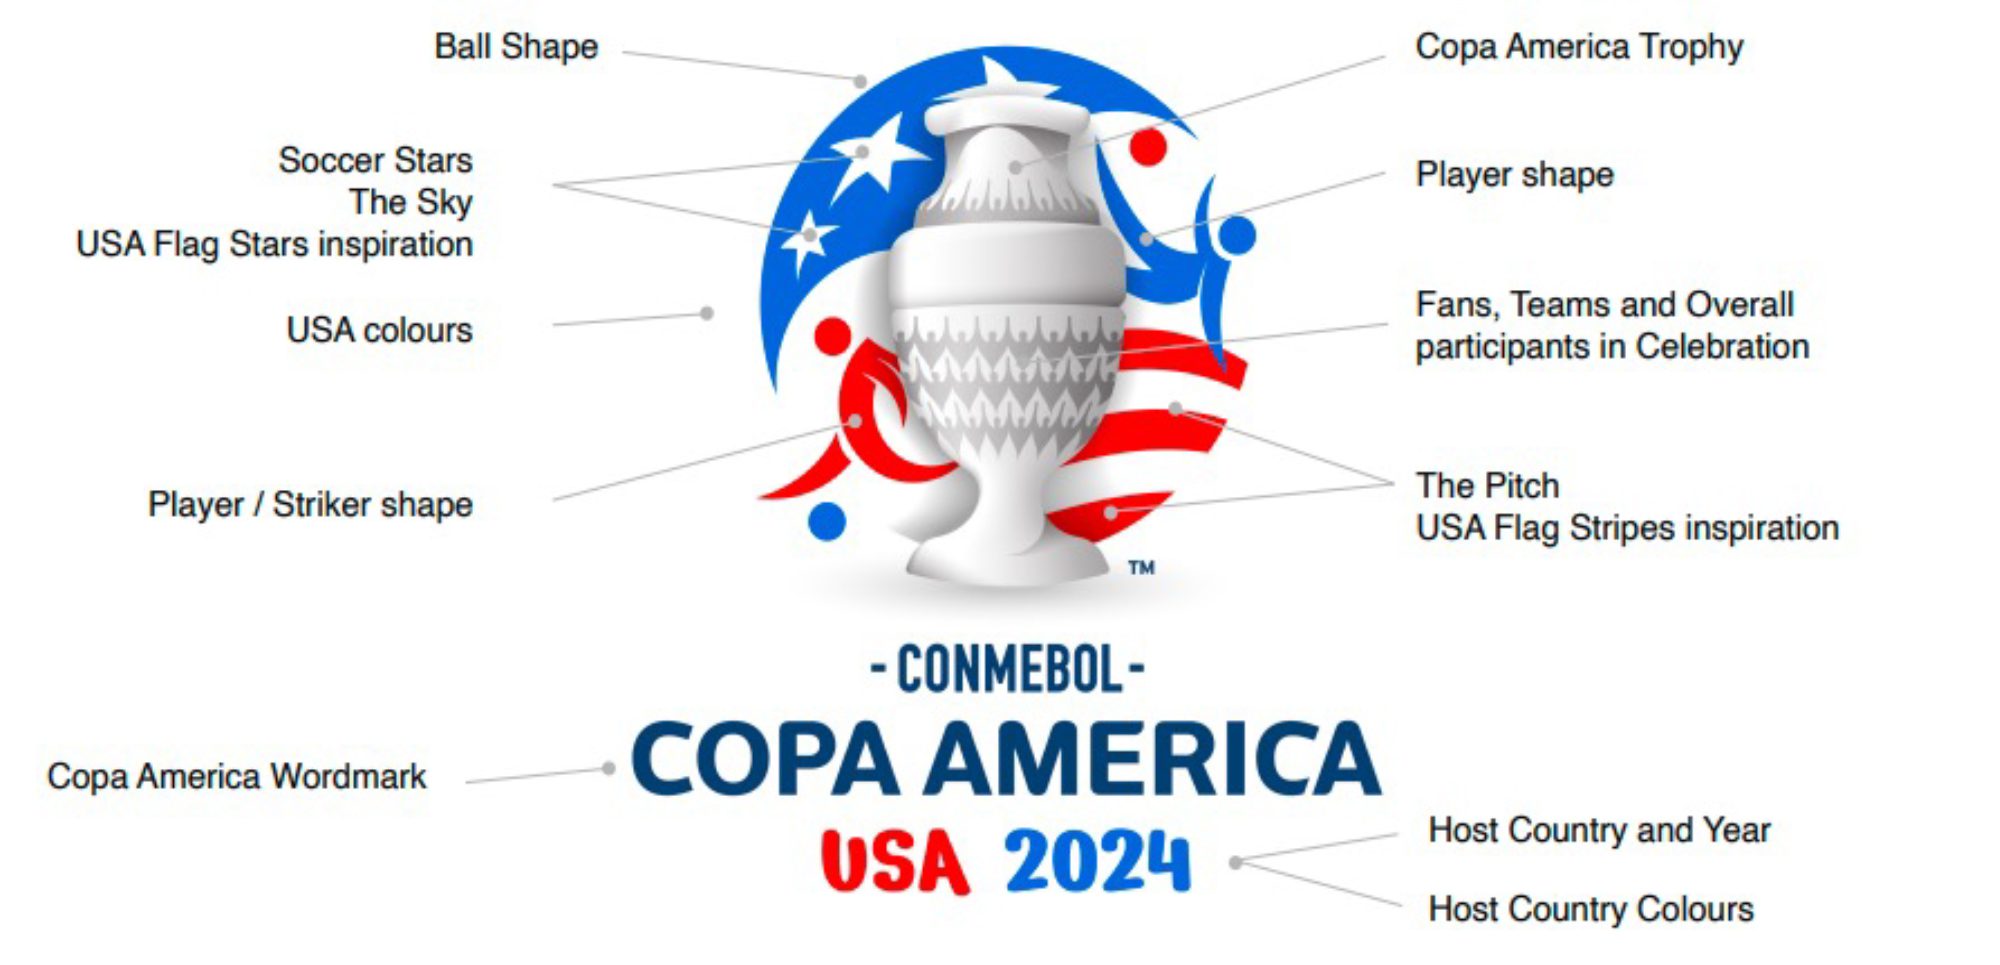 COPA AMERICA USA 2024 GROUP STAGE DRAW 